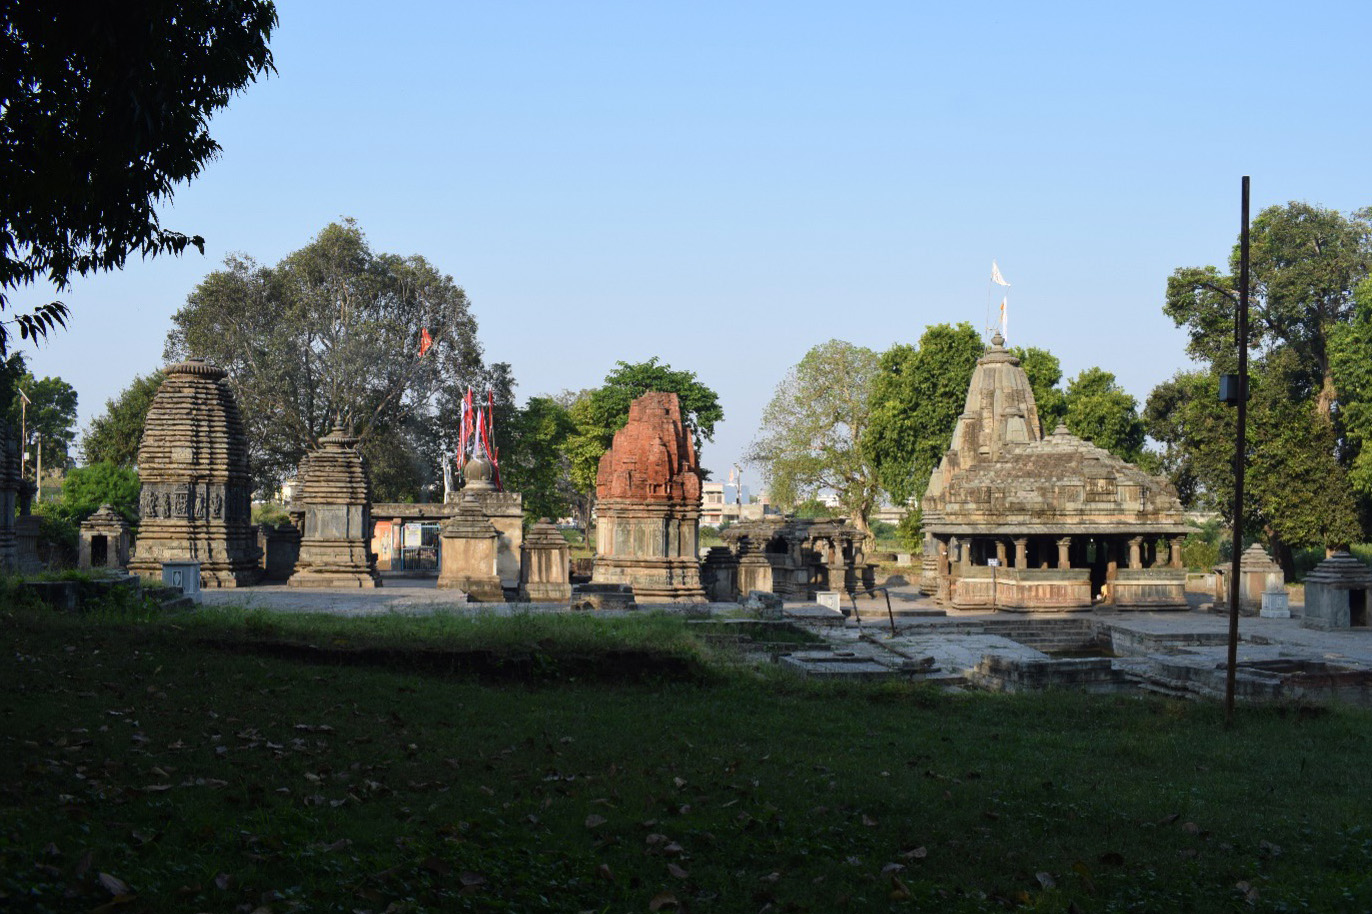 Image 3: An overview of the Hanuman Garhi Temple complex from the eastern side. Seen here (from left to right) are many Shiva temples, behind it is the Hanuman Temple with a flag, Kumbheshwar Temple and Nilkhanth Mahadev Temple with the Surya Kund in front of it.